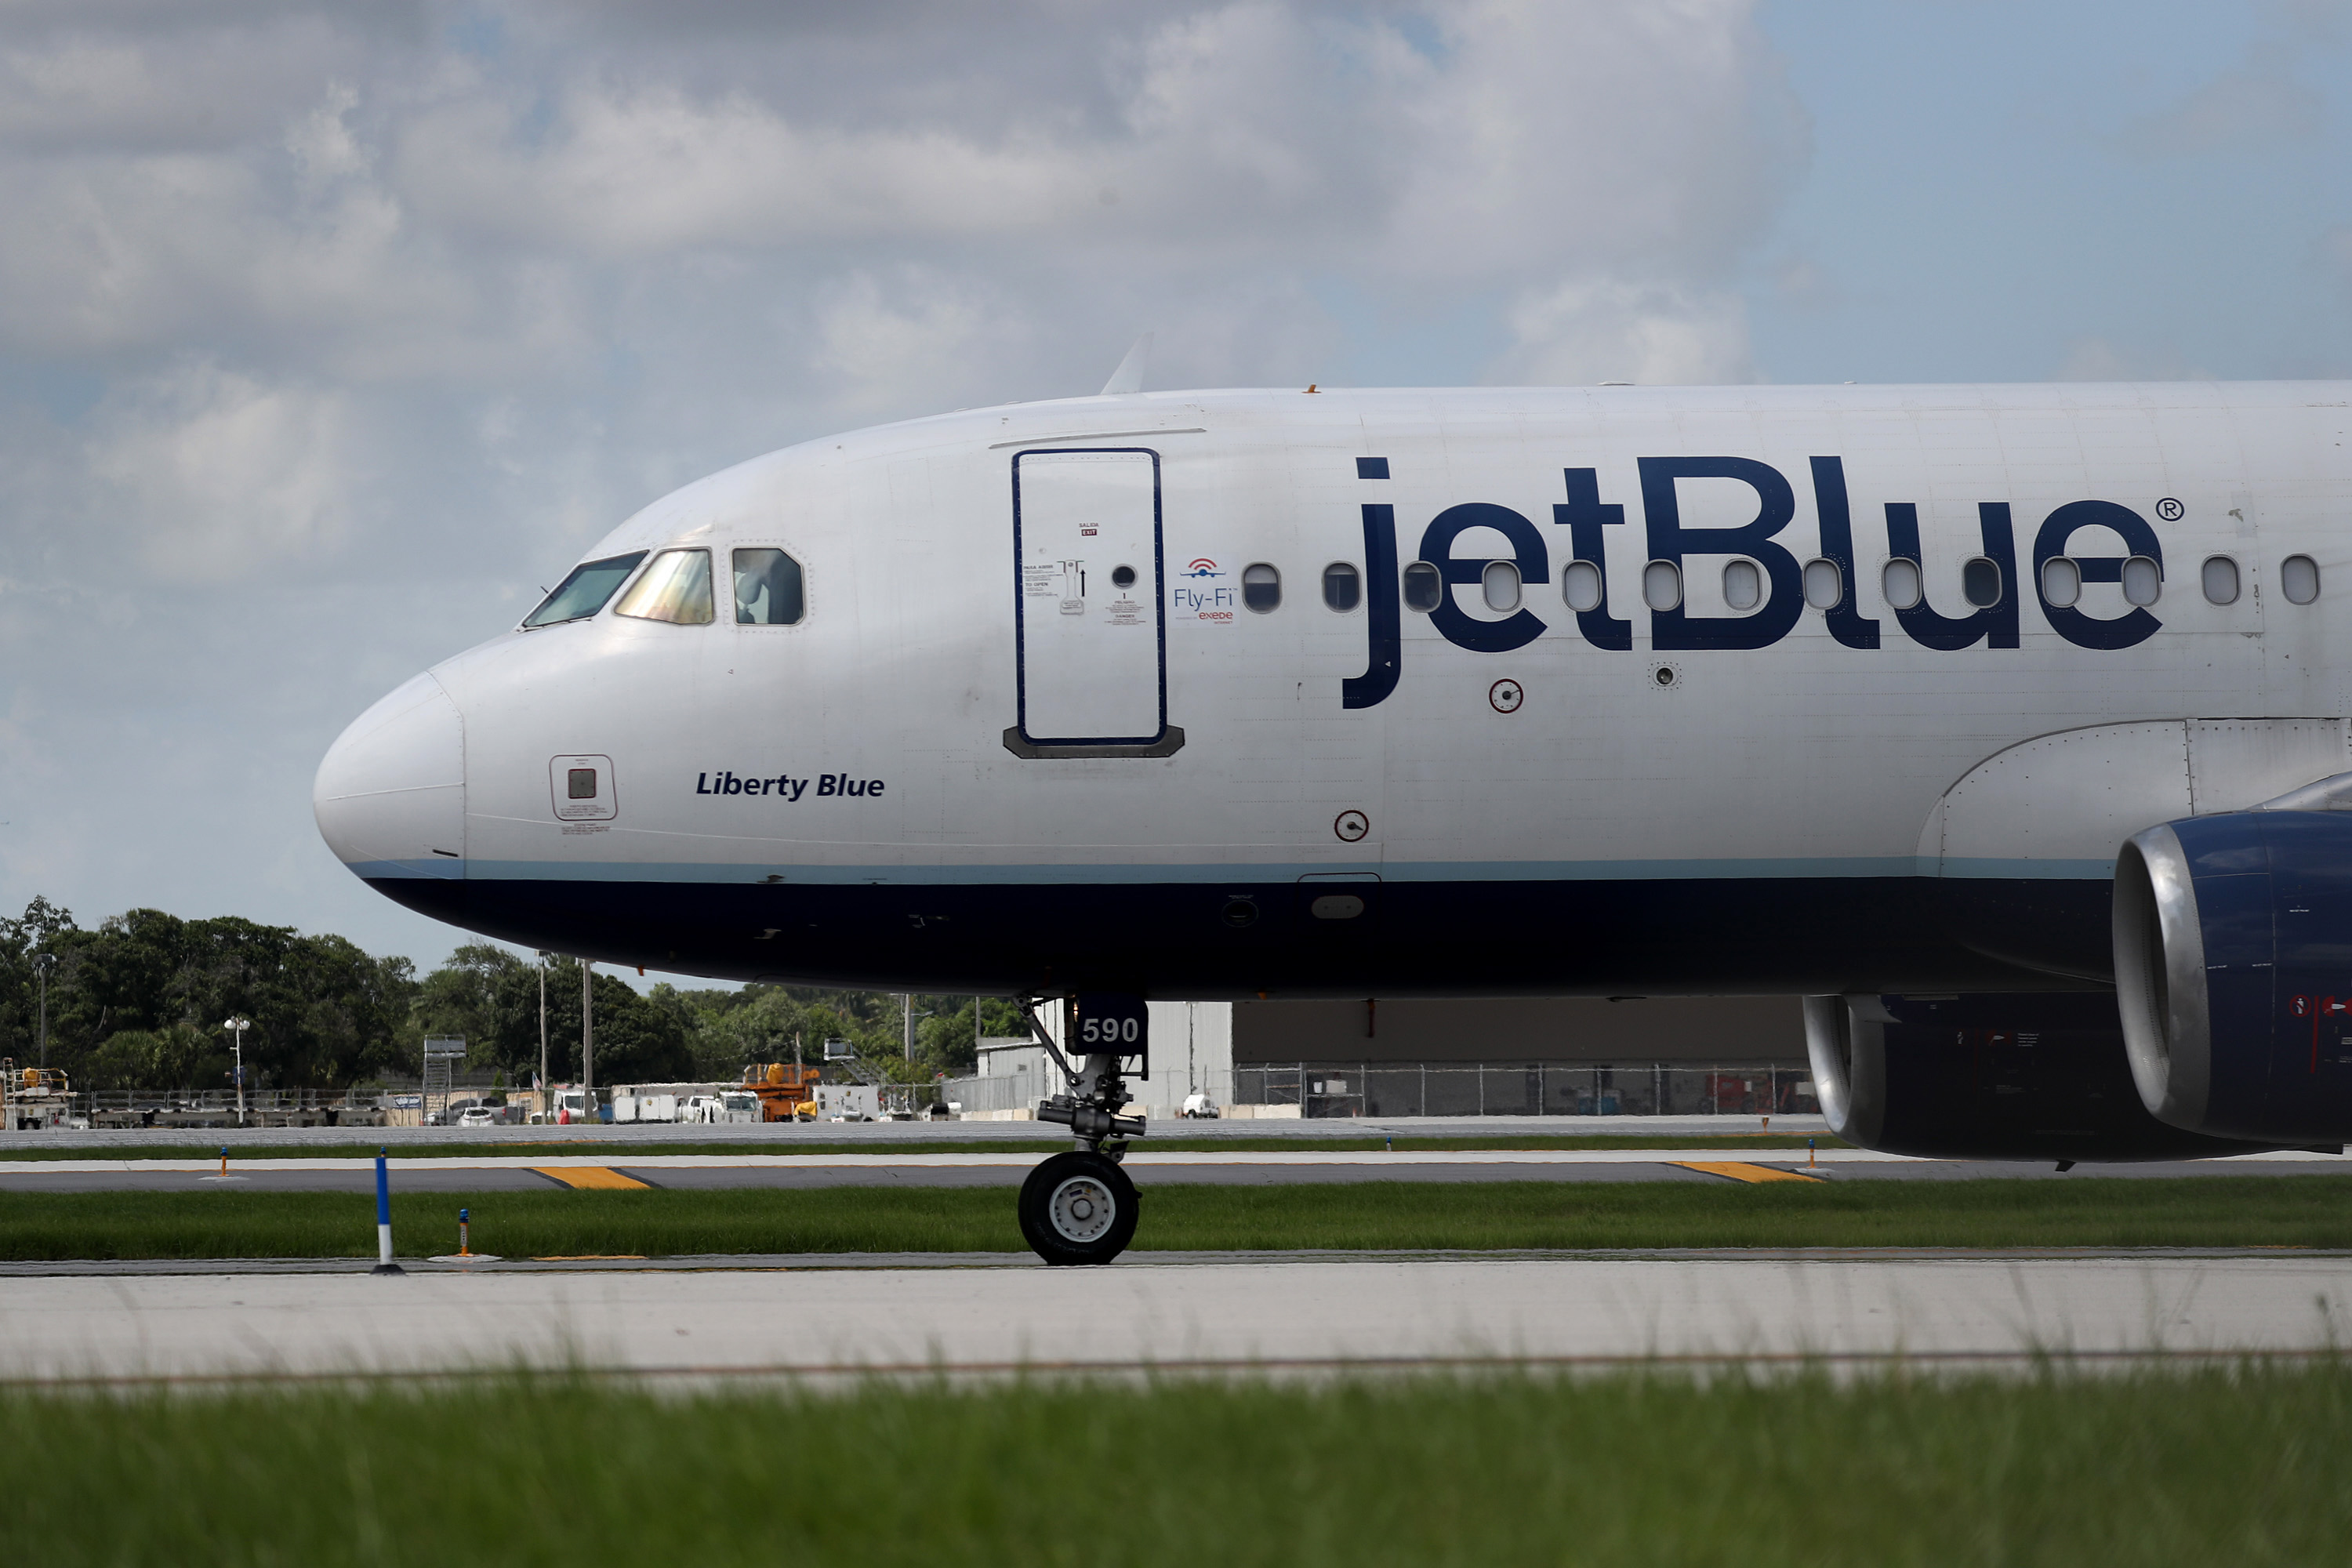 JetBlue Airplane Clips Wing of Southwest Jet at LaGuardia Airport, FAA Says